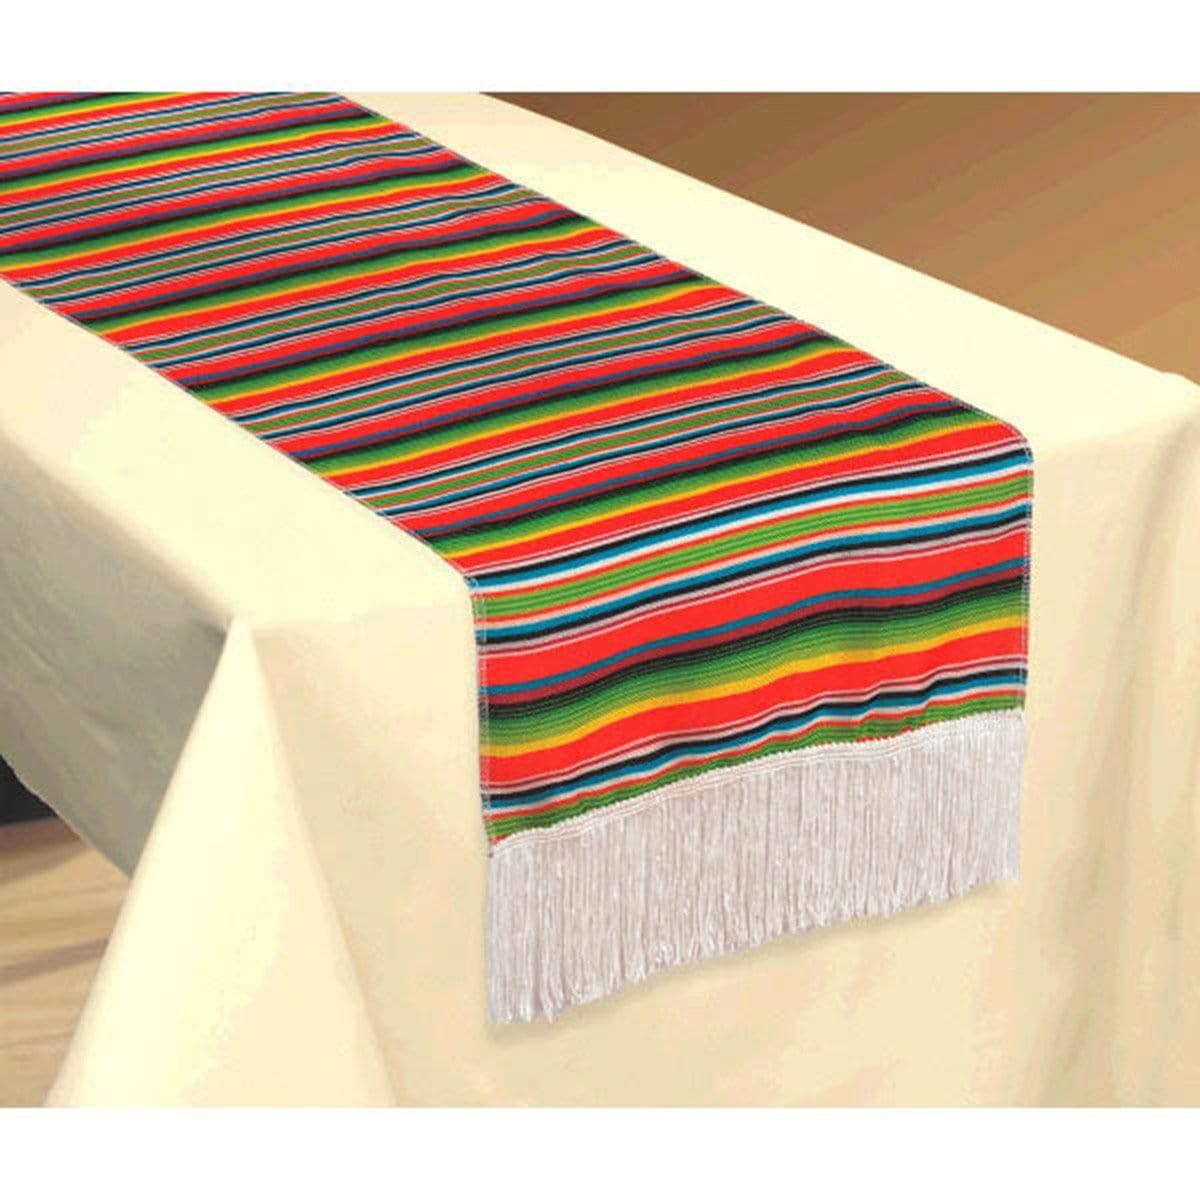 Buy Theme Party Fiesta Serape Table Runner sold at Party Expert